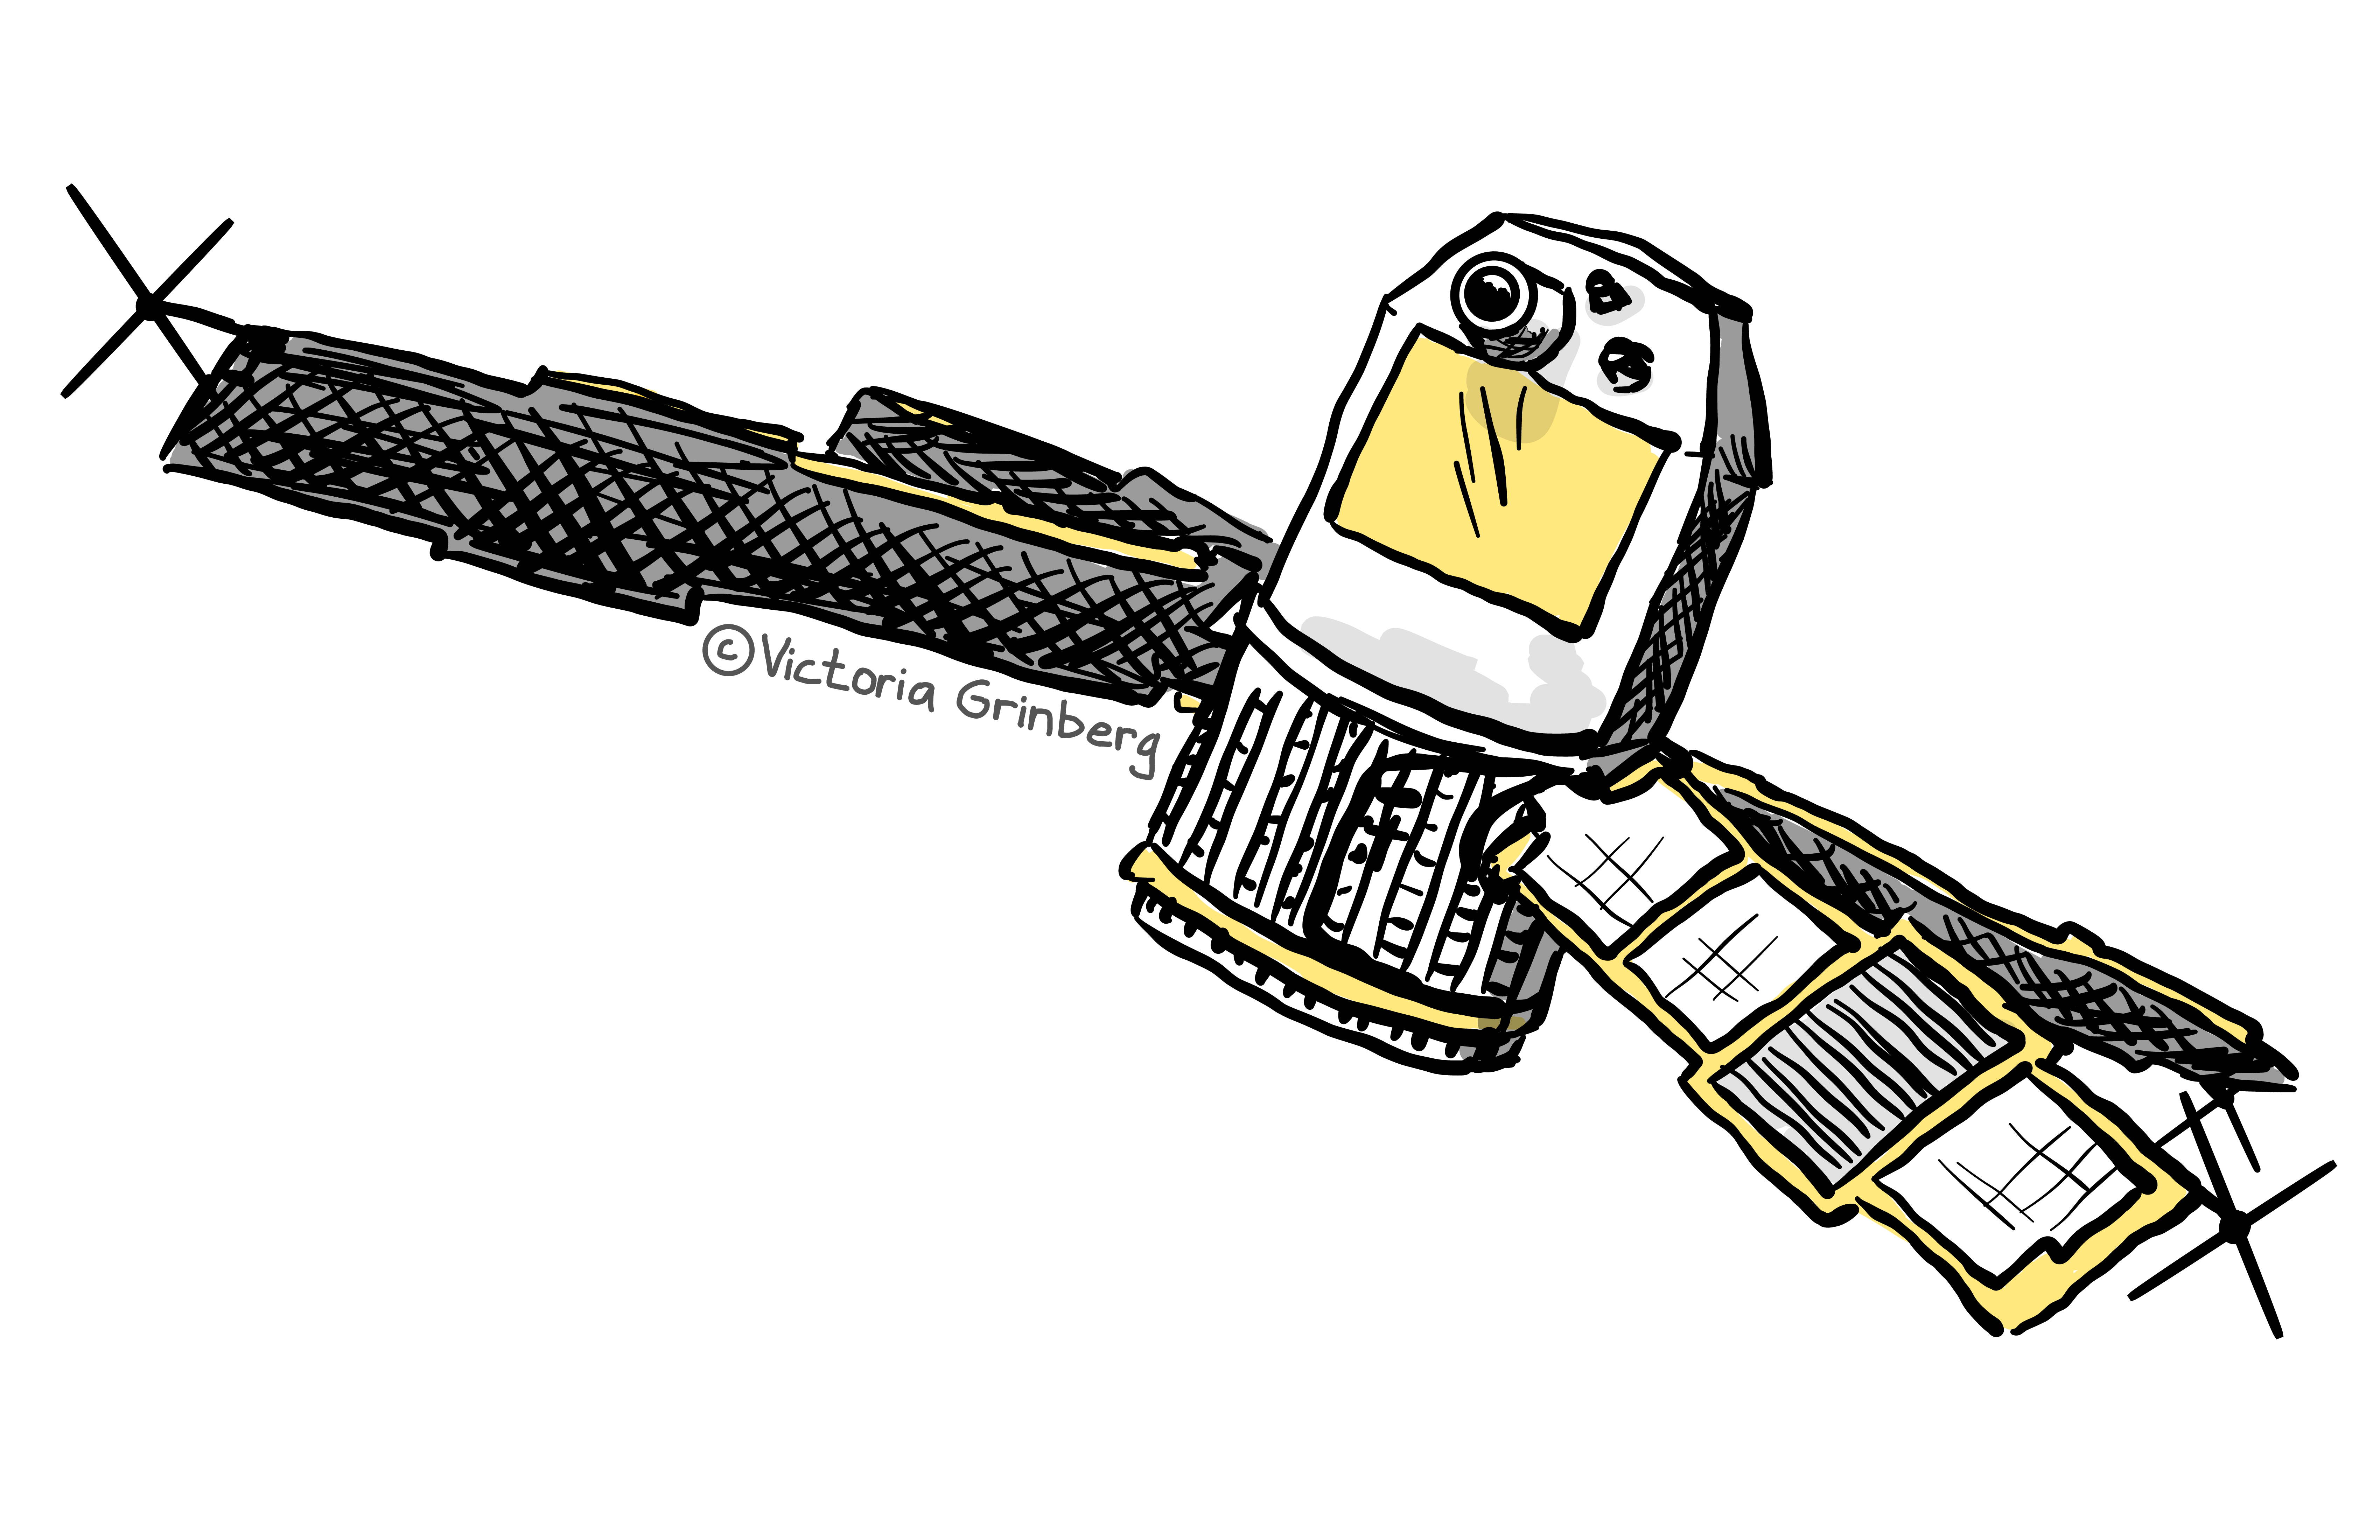 Digital sketch of the Uhuru satellite in black and grey, with some gold added for highlights.